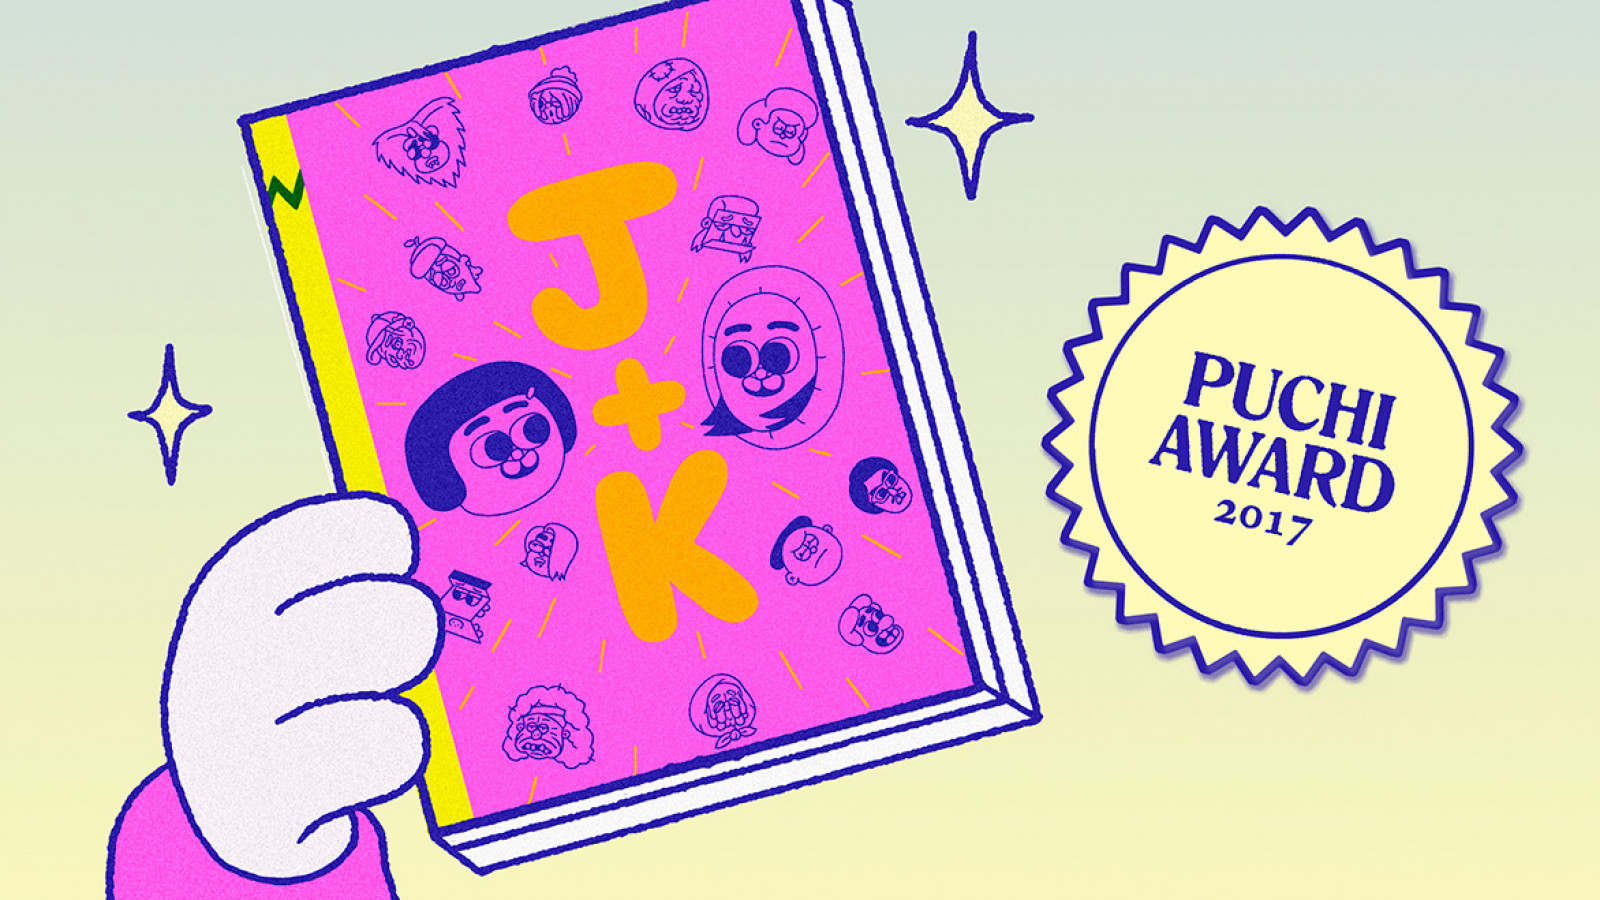 Puchi Award announces its first edition winners